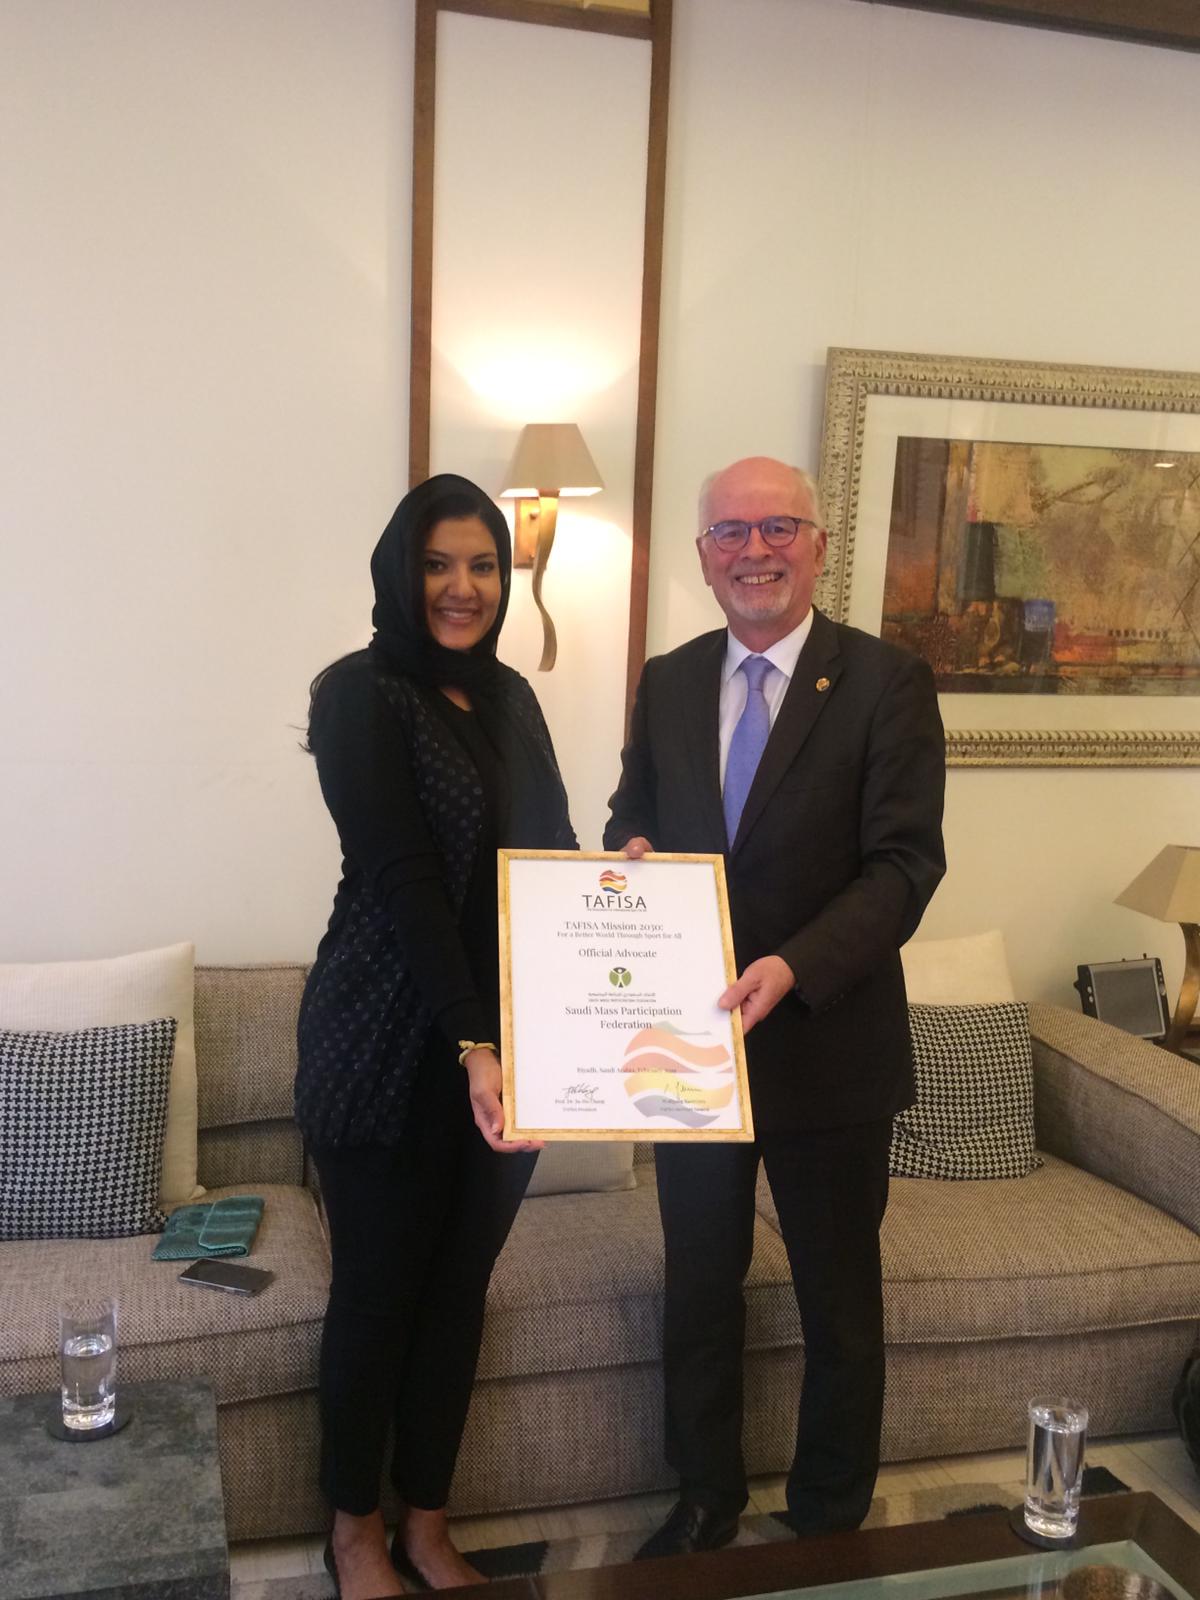 TAFISA Secretary General Wolfgang Baumann presenting outgoing President HRH Princess Reema Bint Bandar Al Saud with an Official Advocate certificate as a mark of her support of TAFISA’s Mission 2030